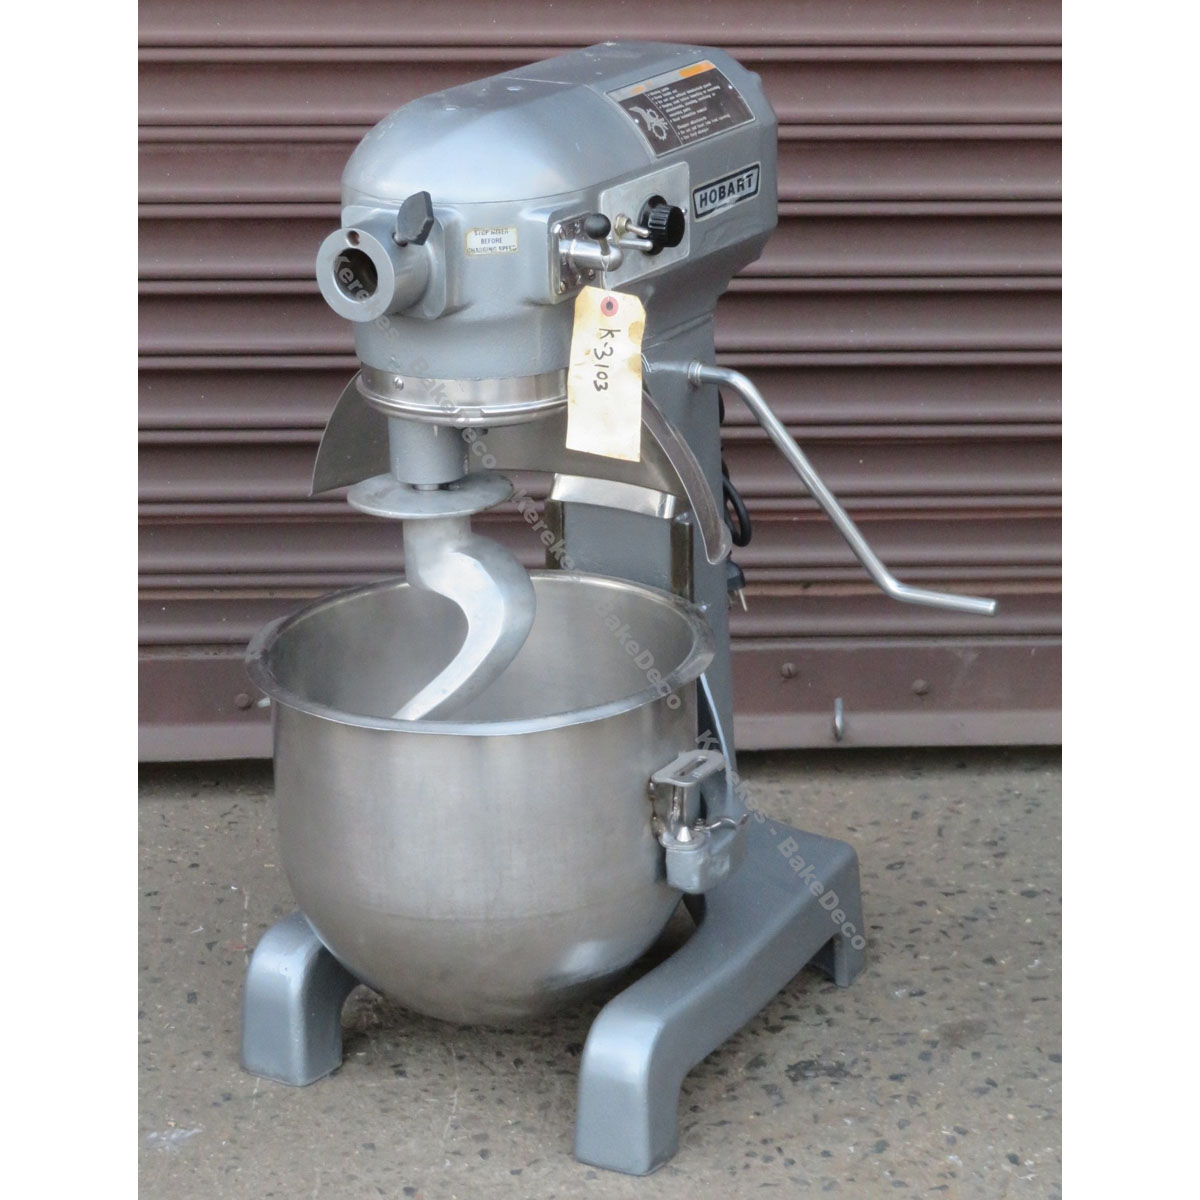 Hobart 20 Quart A200 Mixer, Used Great Condition